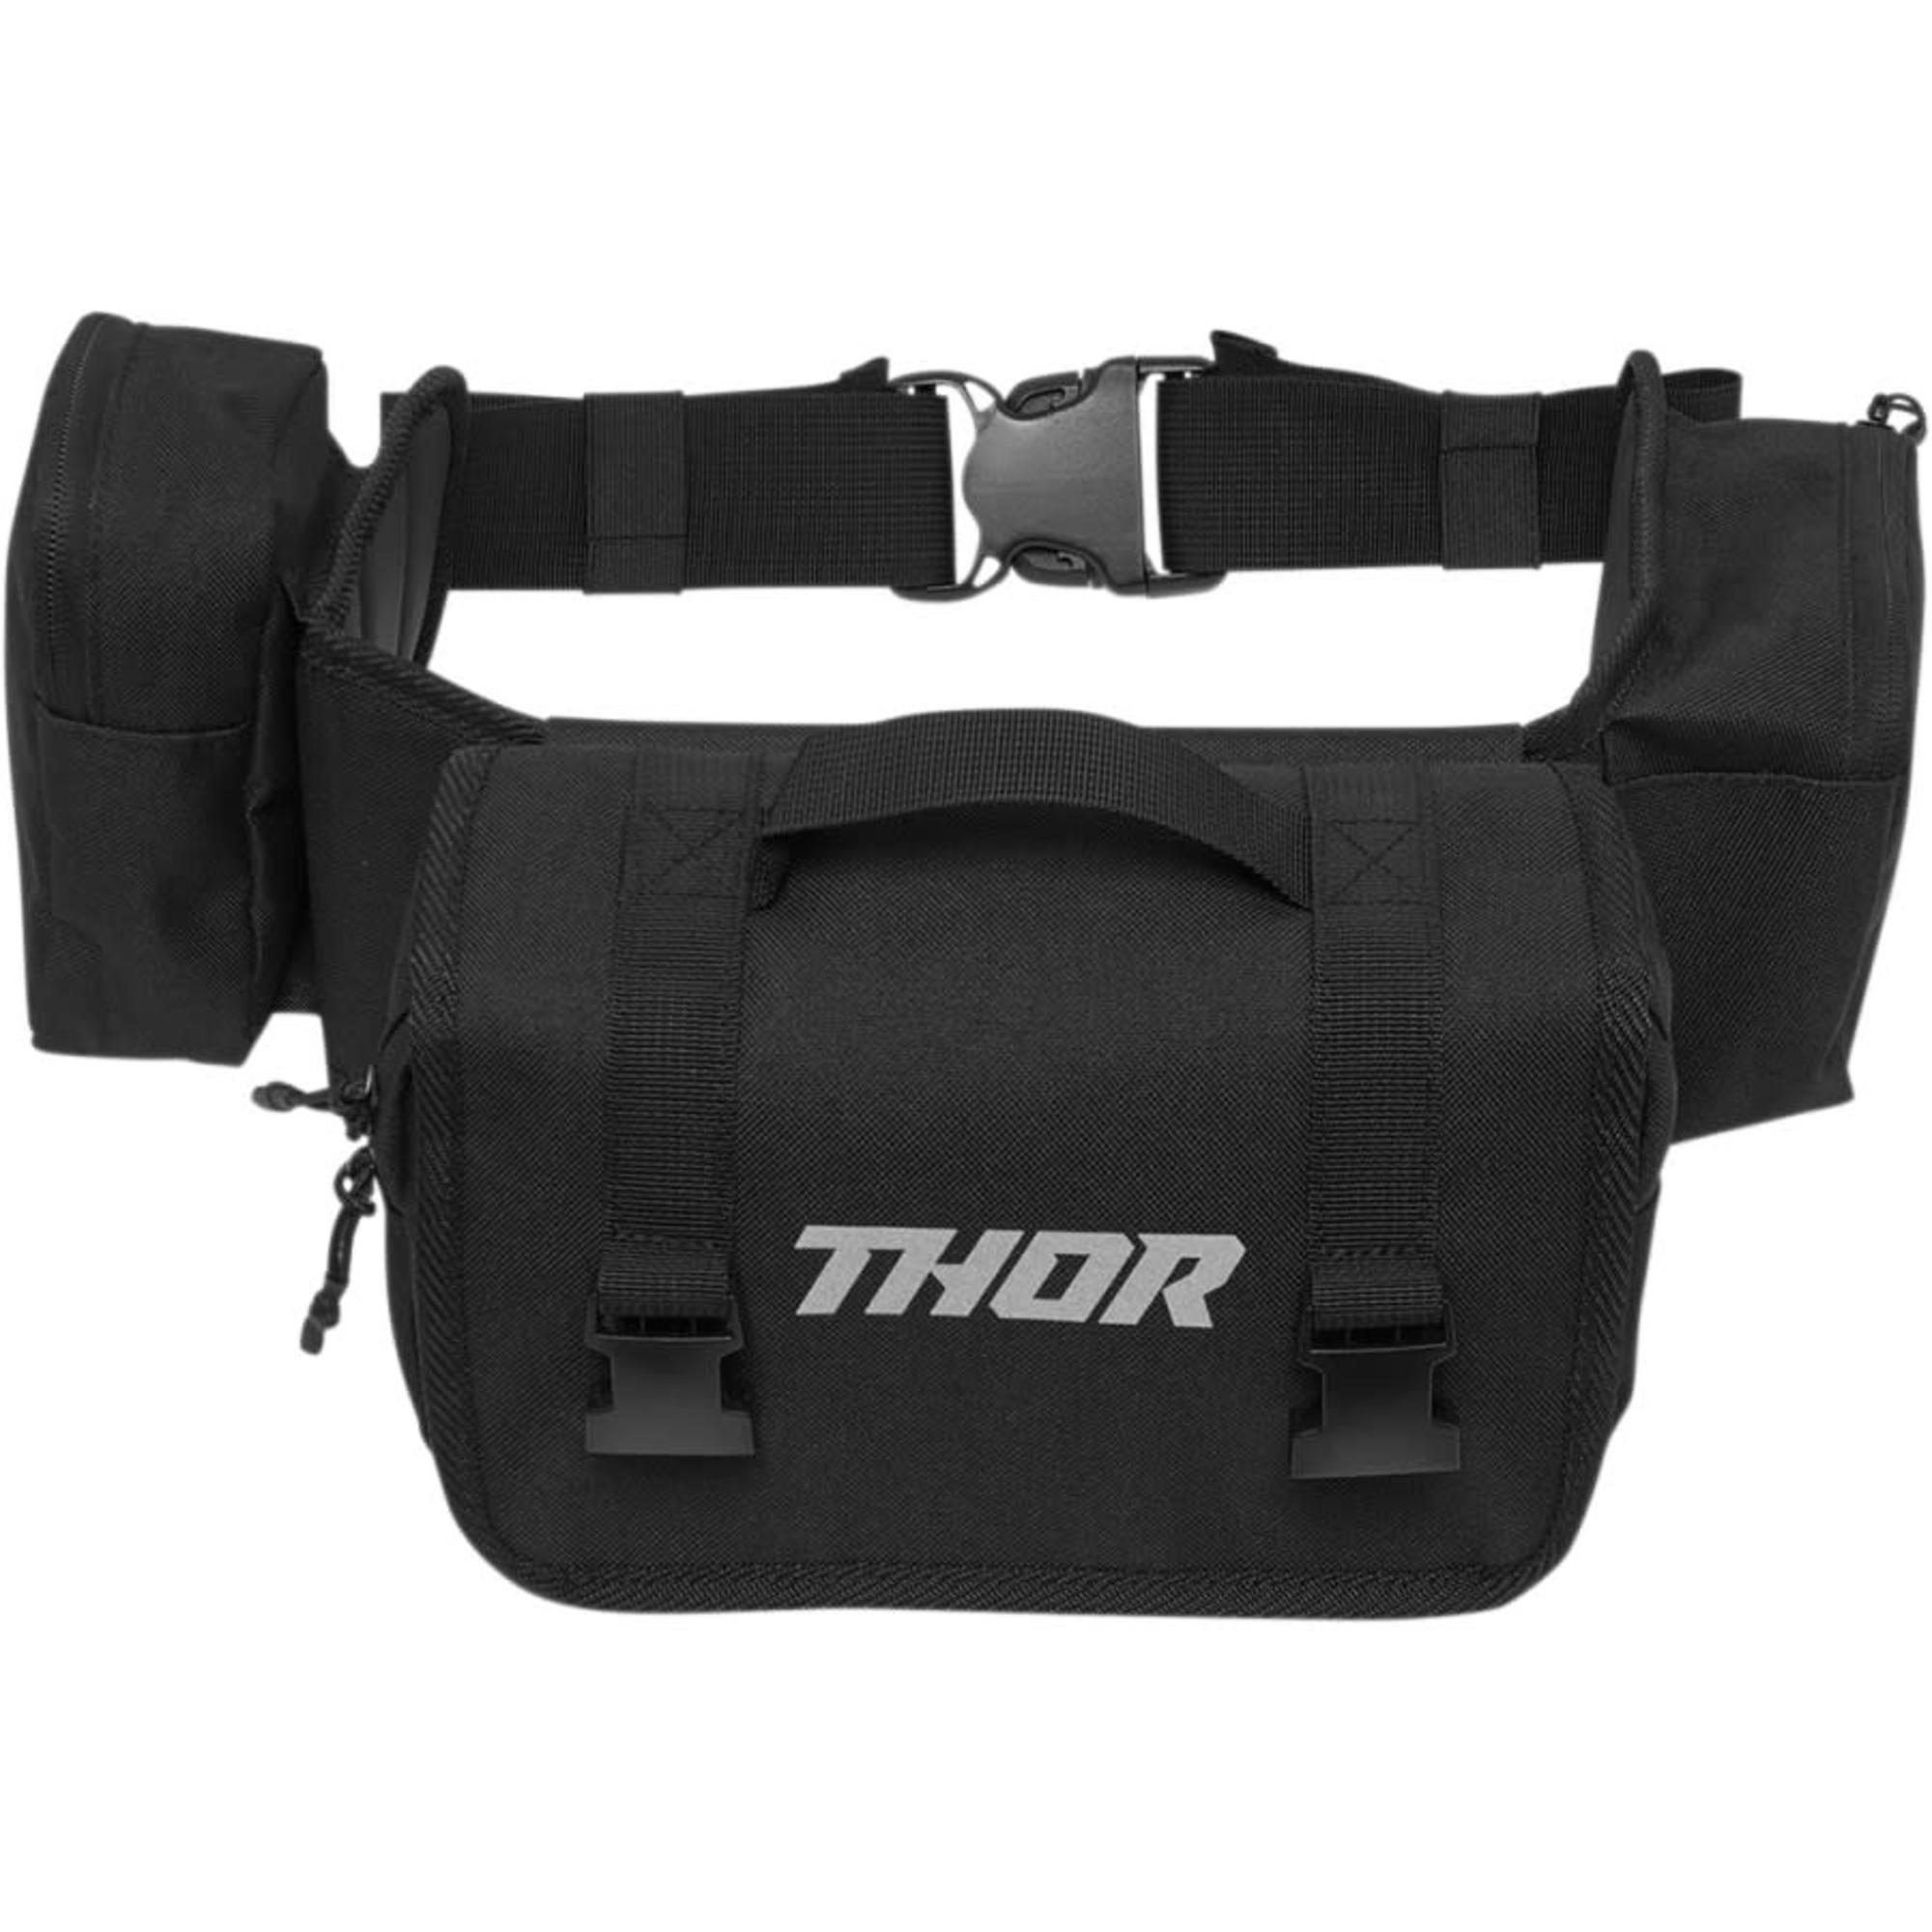 thor tool bags vault pack